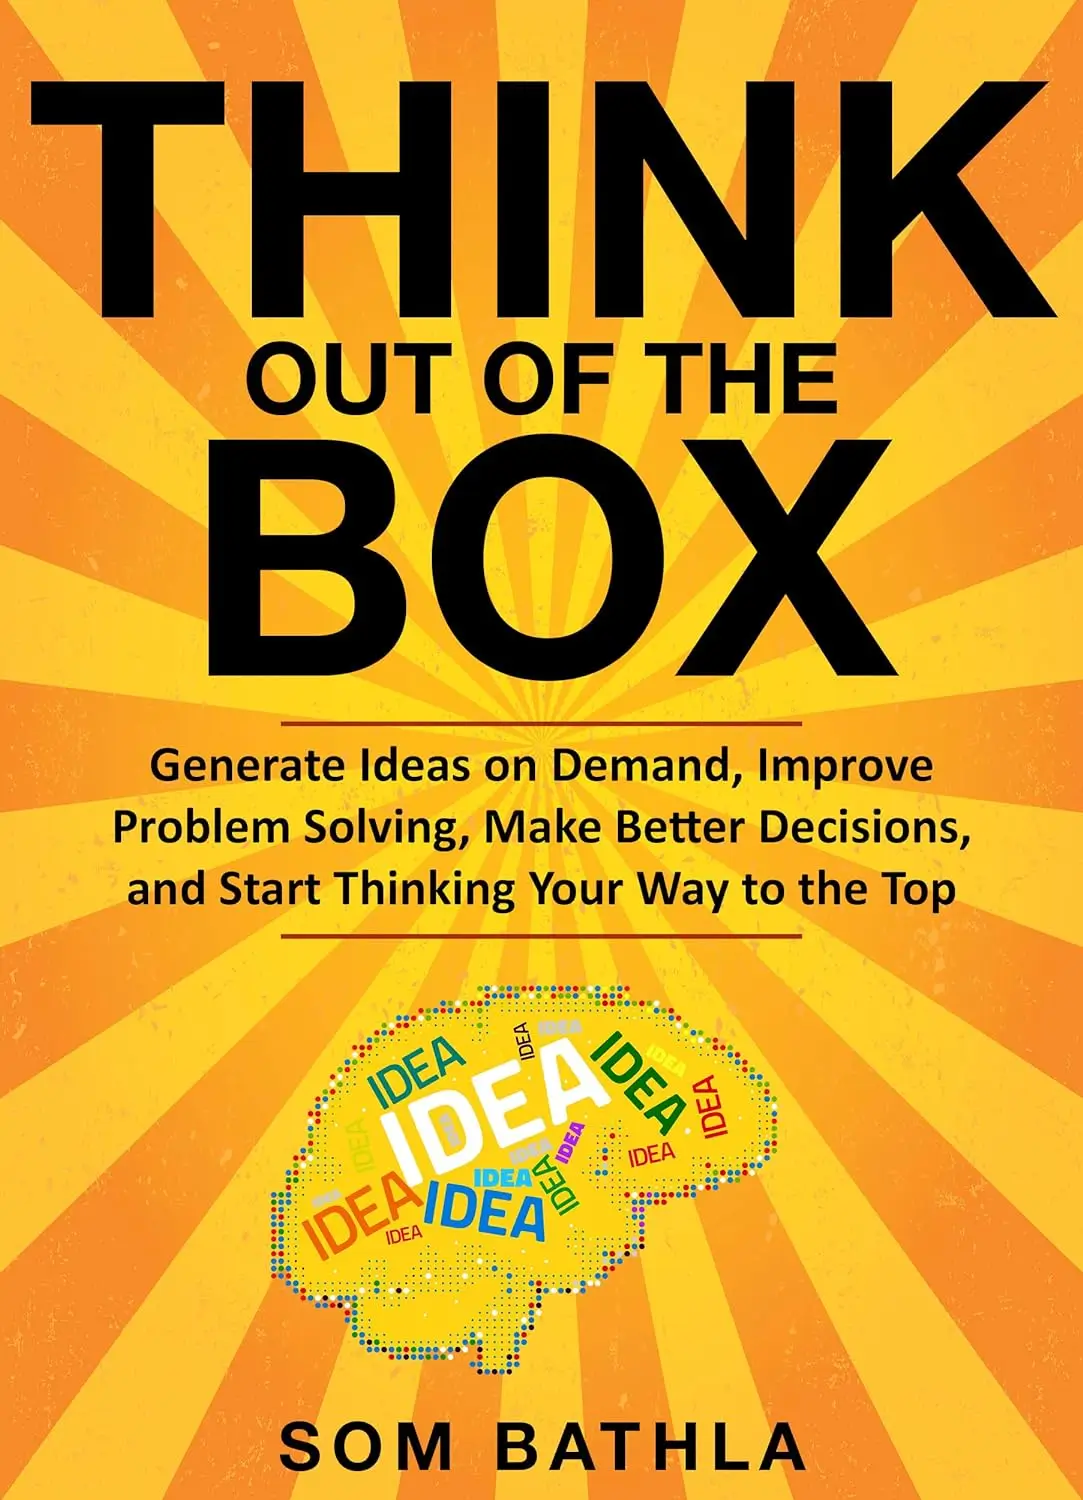 Think Out of The Box: Generate Ideas on Demand, Improve Problem Solving, Make Better Decisions, and Start Thinking Your Way to the Top